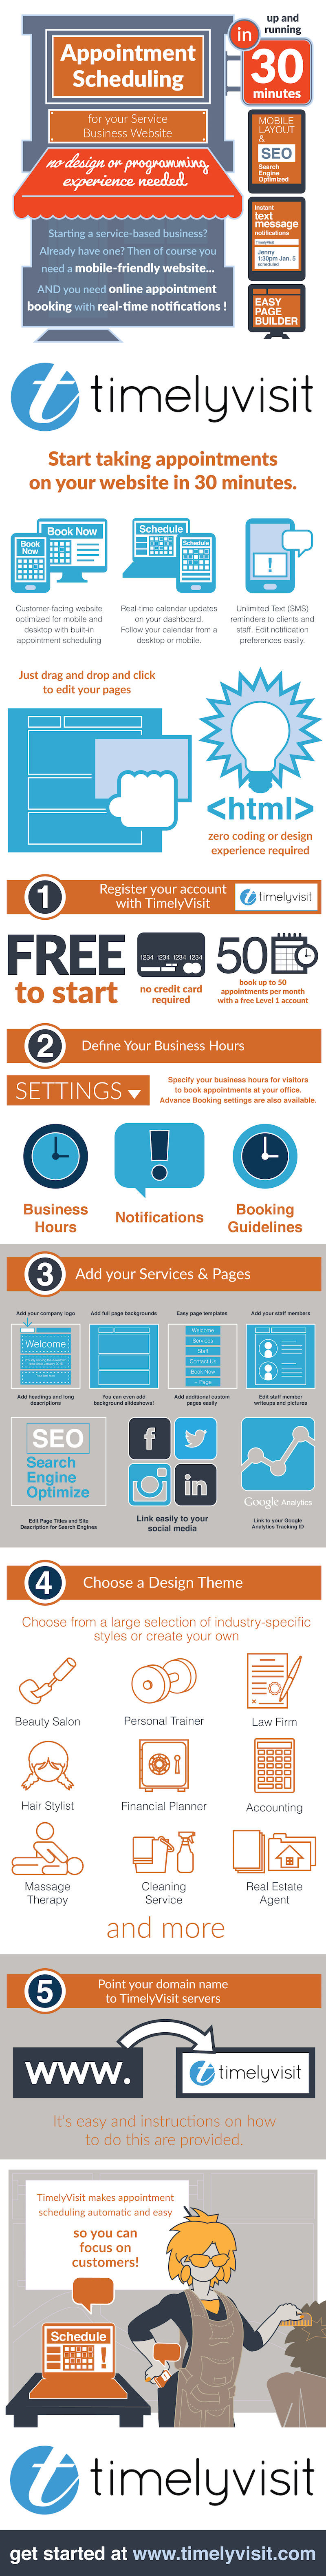 How To Create A Website In 30 Minutes With No Web Design Experience (infographic)